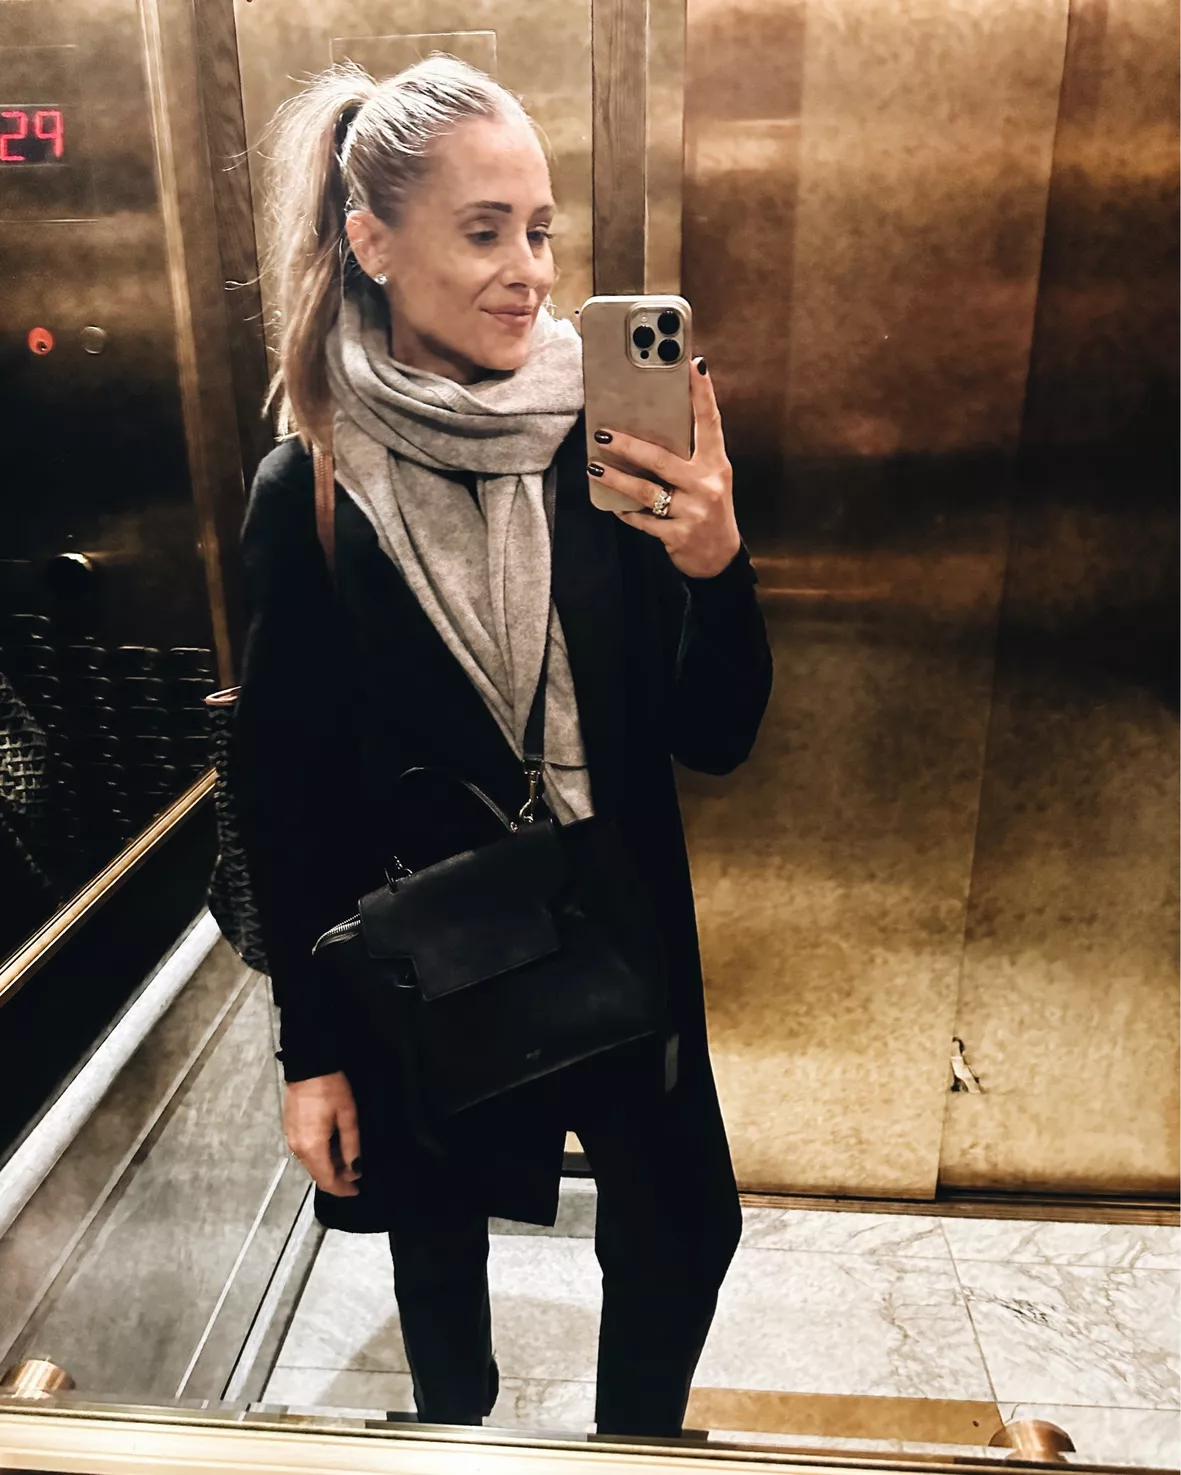 The Classic Winter Outfit From Everlane I Wore in NYC, Fashion Jackson